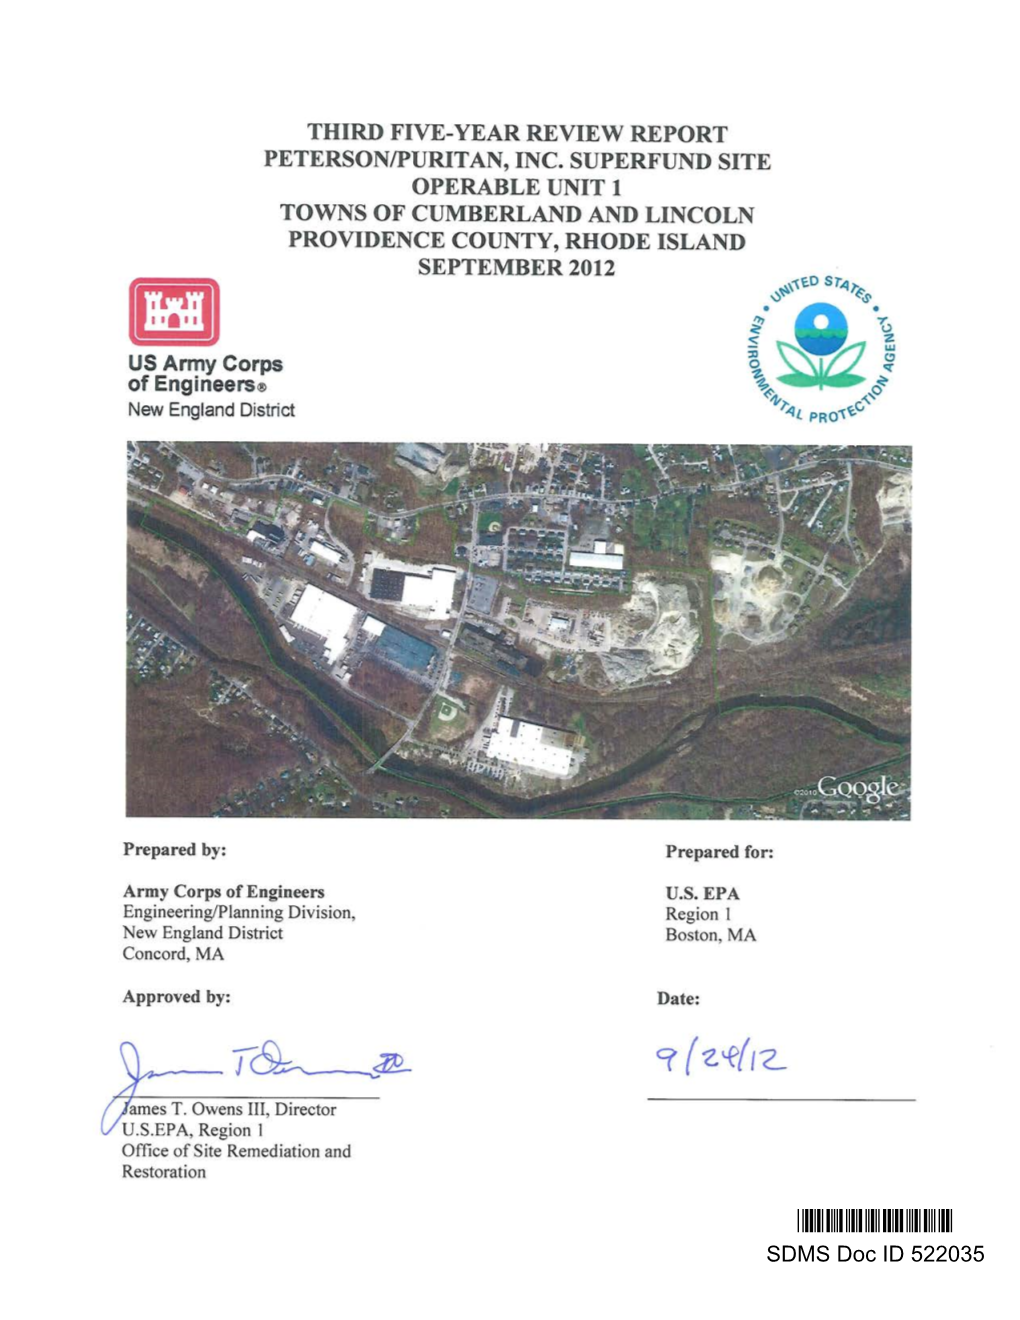 Third 5-Year Review Report Peterson/Puritan Superfund Site